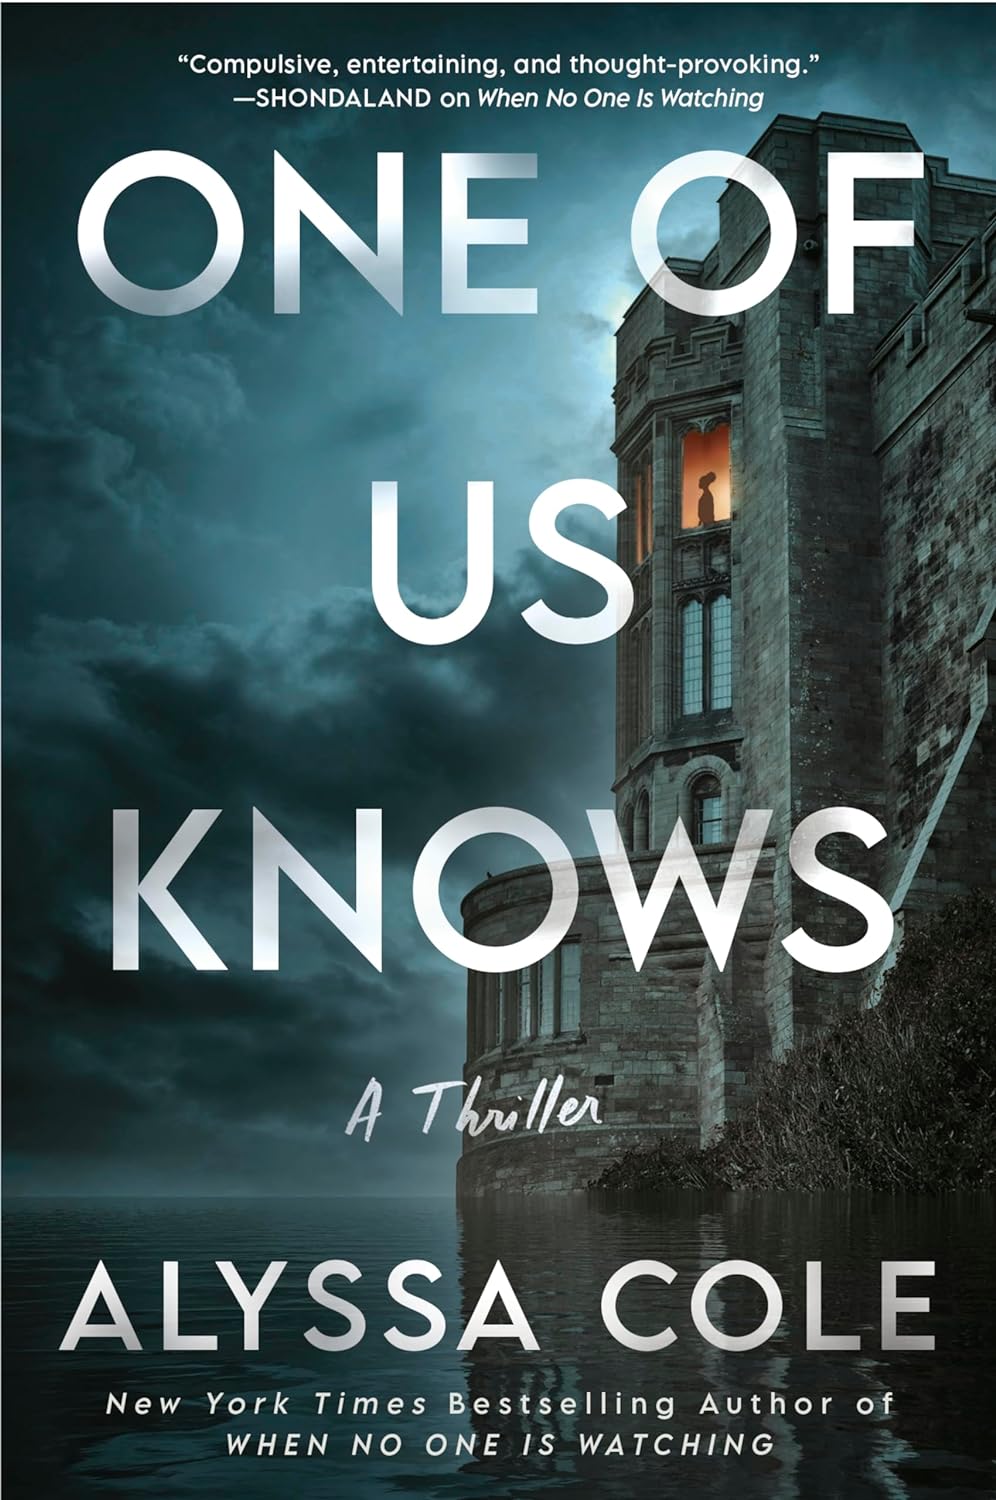 Image for "One of Us Knows"